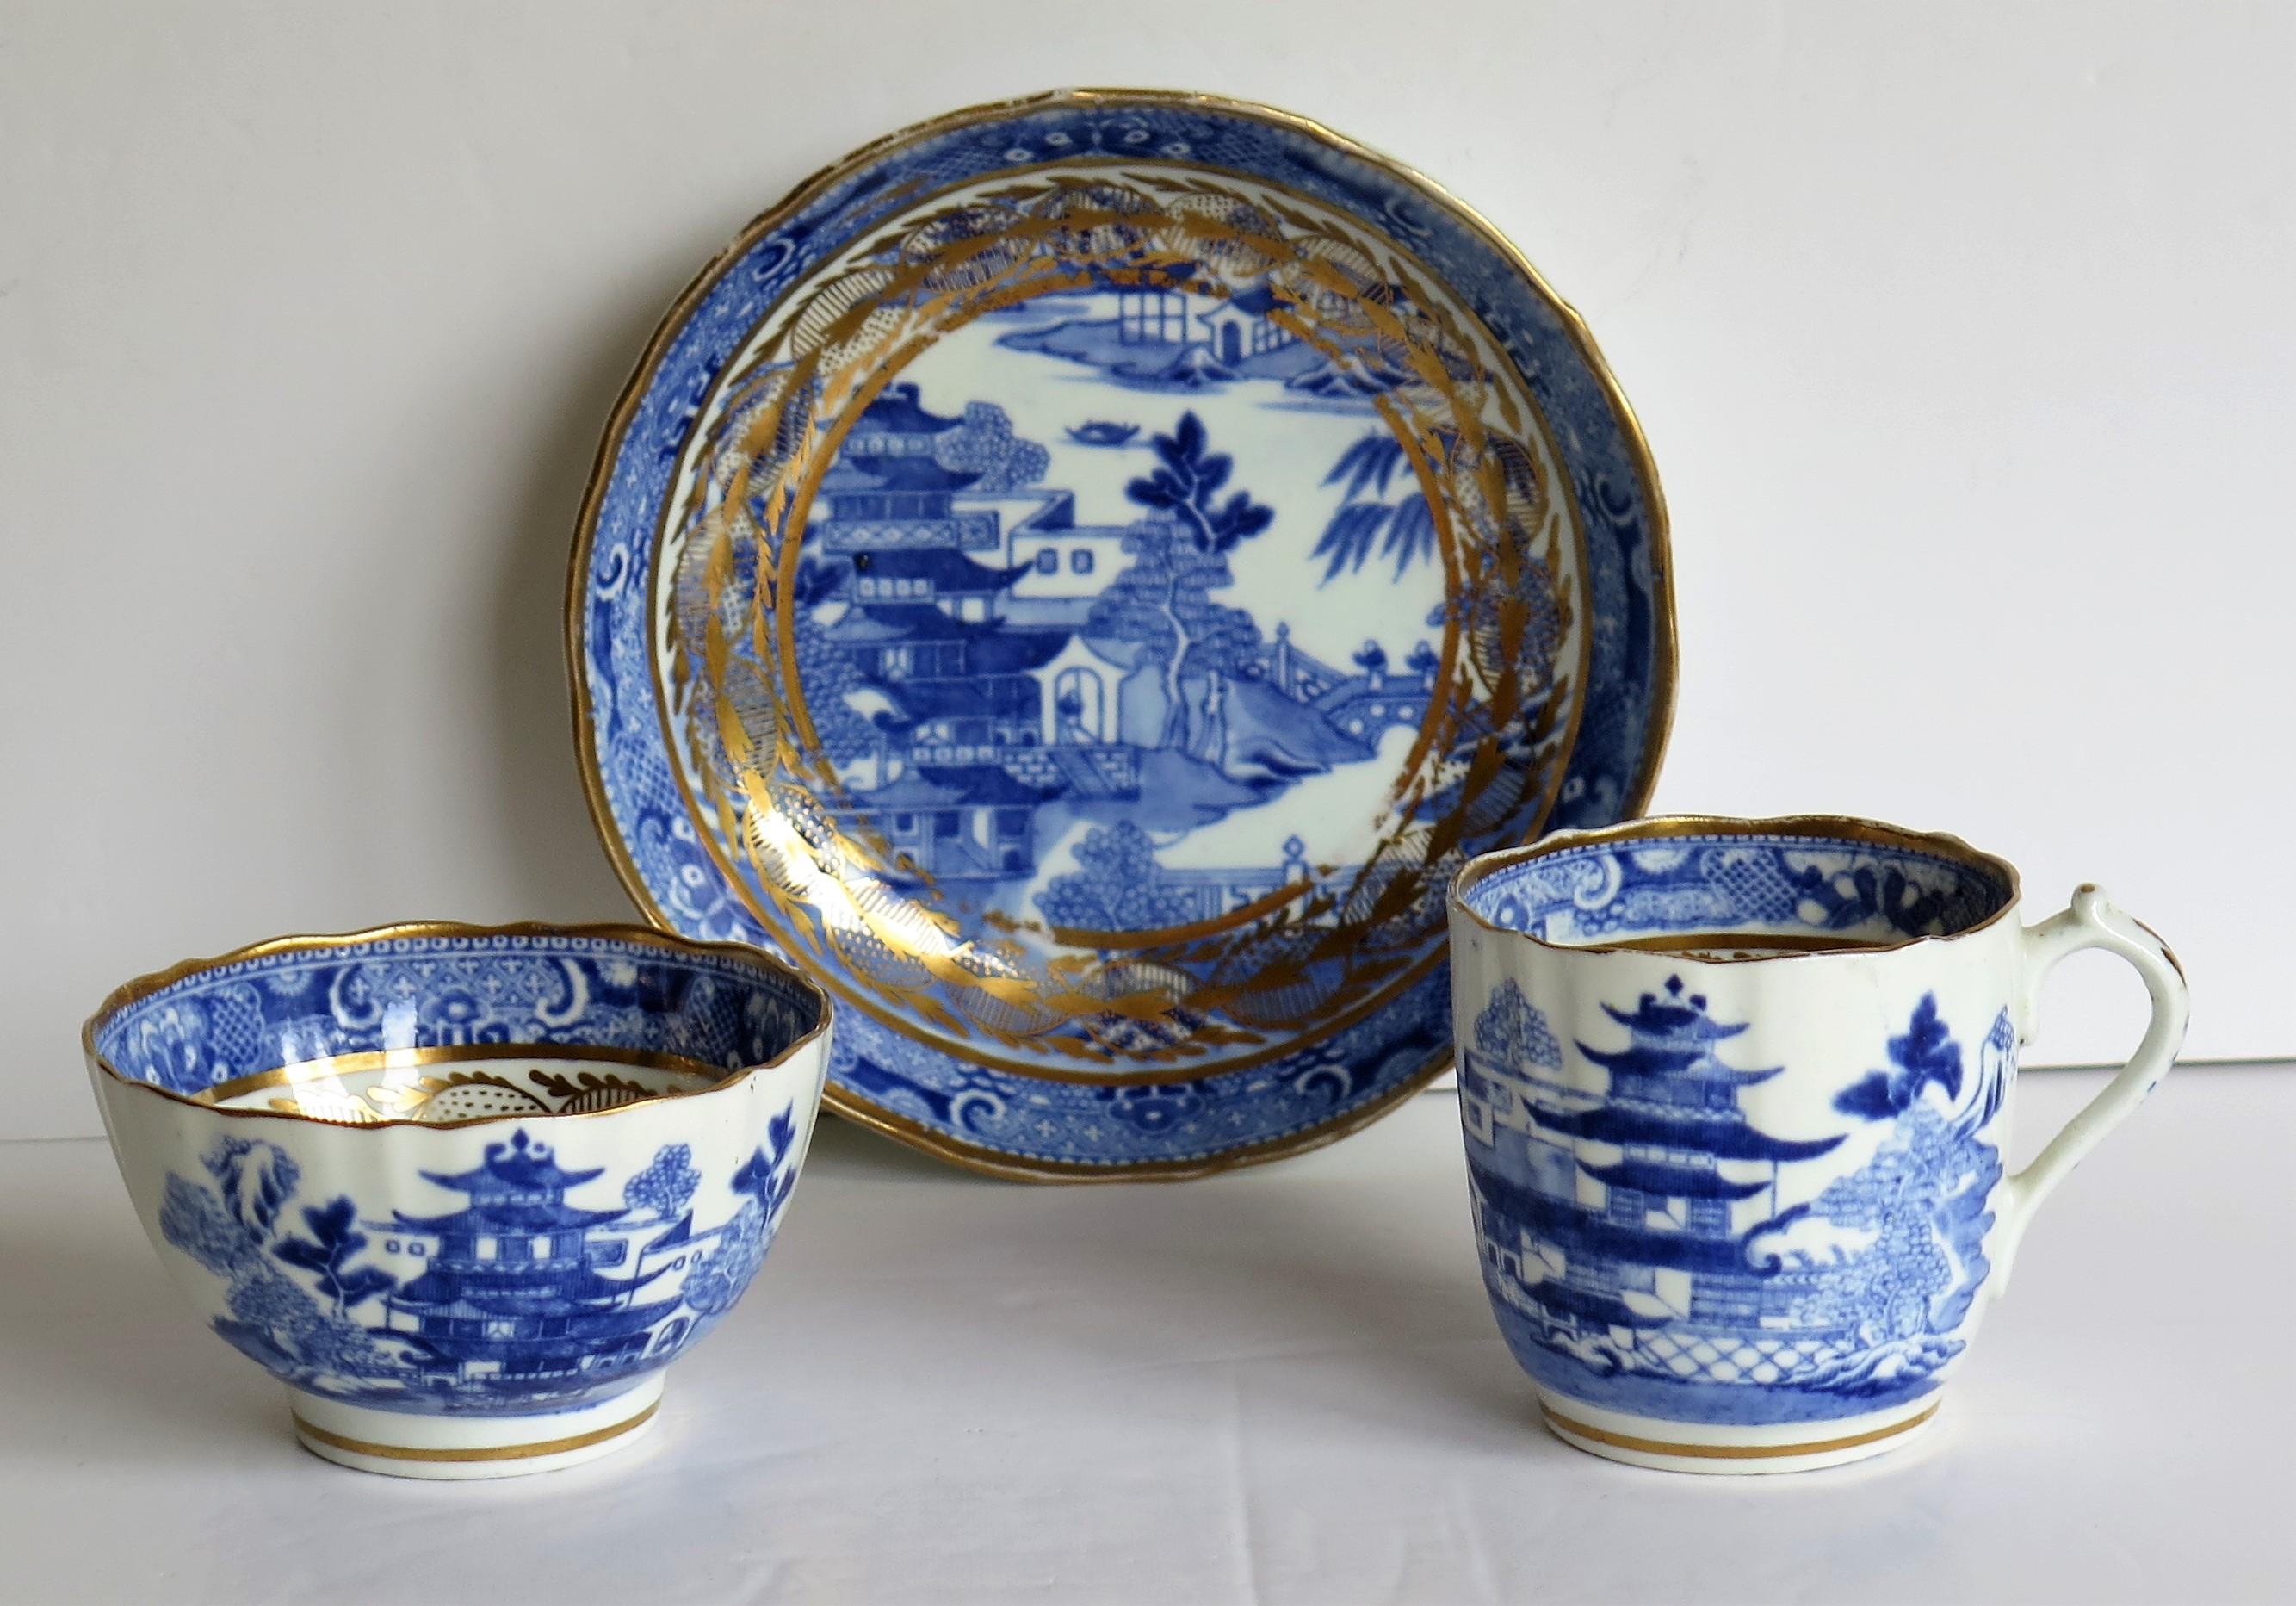 This is a porcelain blue and white, gilded trio comprising a coffee cup, tea bowl and saucer made by Miles Mason (Mason's), Staffordshire Potteries, in the early 19th century George 111rd period, circa 1805-1810.

All pieces are well potted with